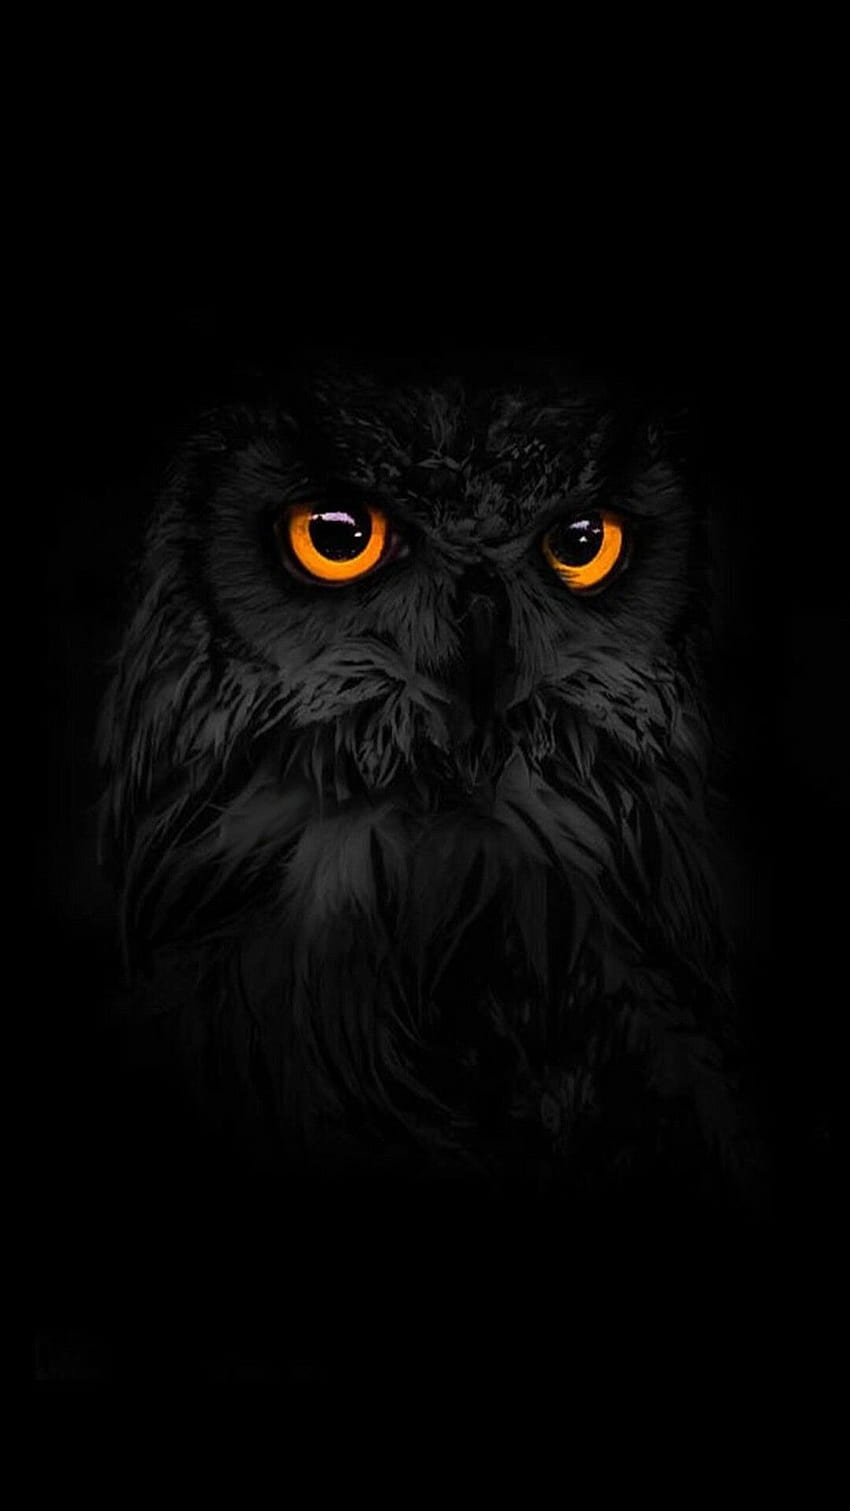 80 Phone Backgrounds, mighty owl HD phone wallpaper